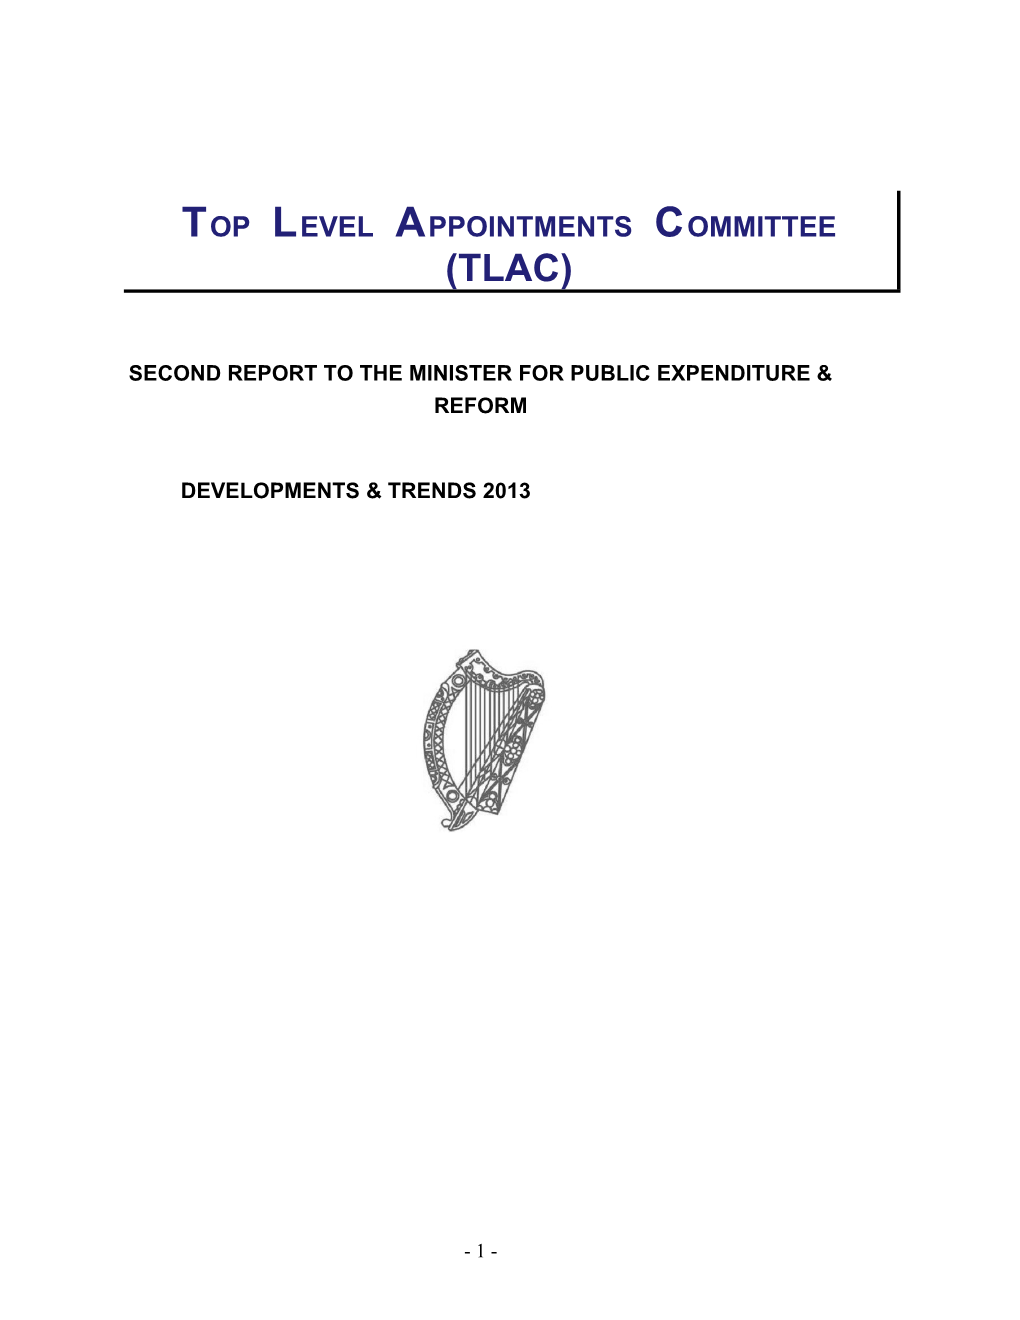 Second Report to the Minister for Public Expenditure & Reform